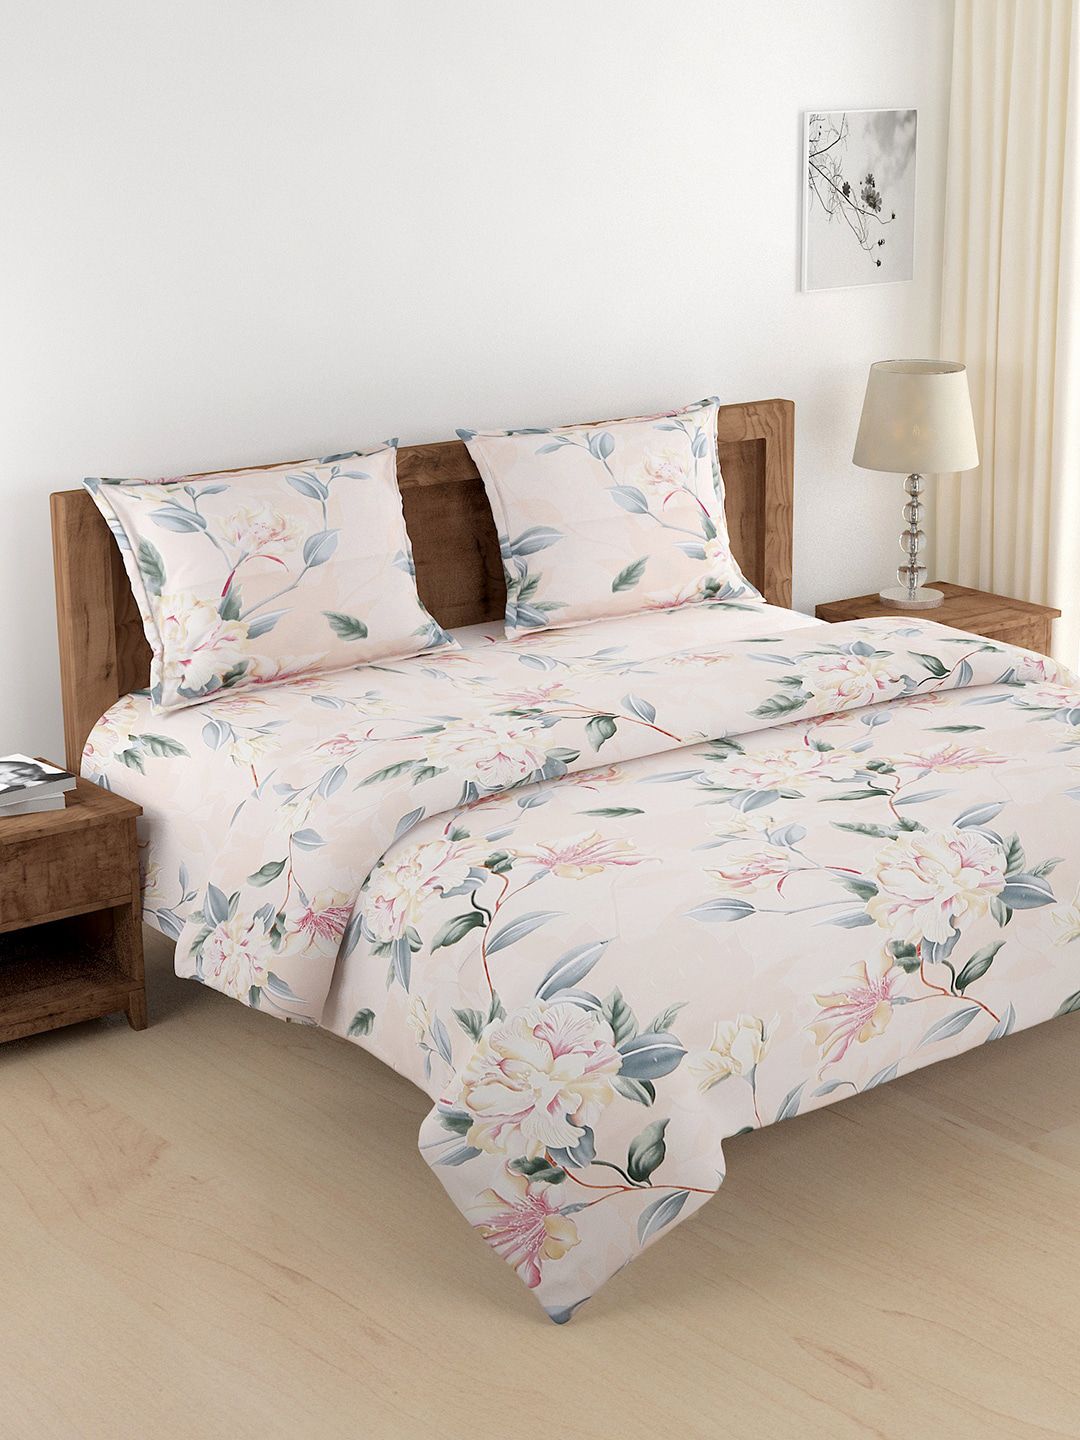 SWAYAM Peach-Coloured & Green Floral Printed Cotton 180 TC Double King Bedding Set Price in India